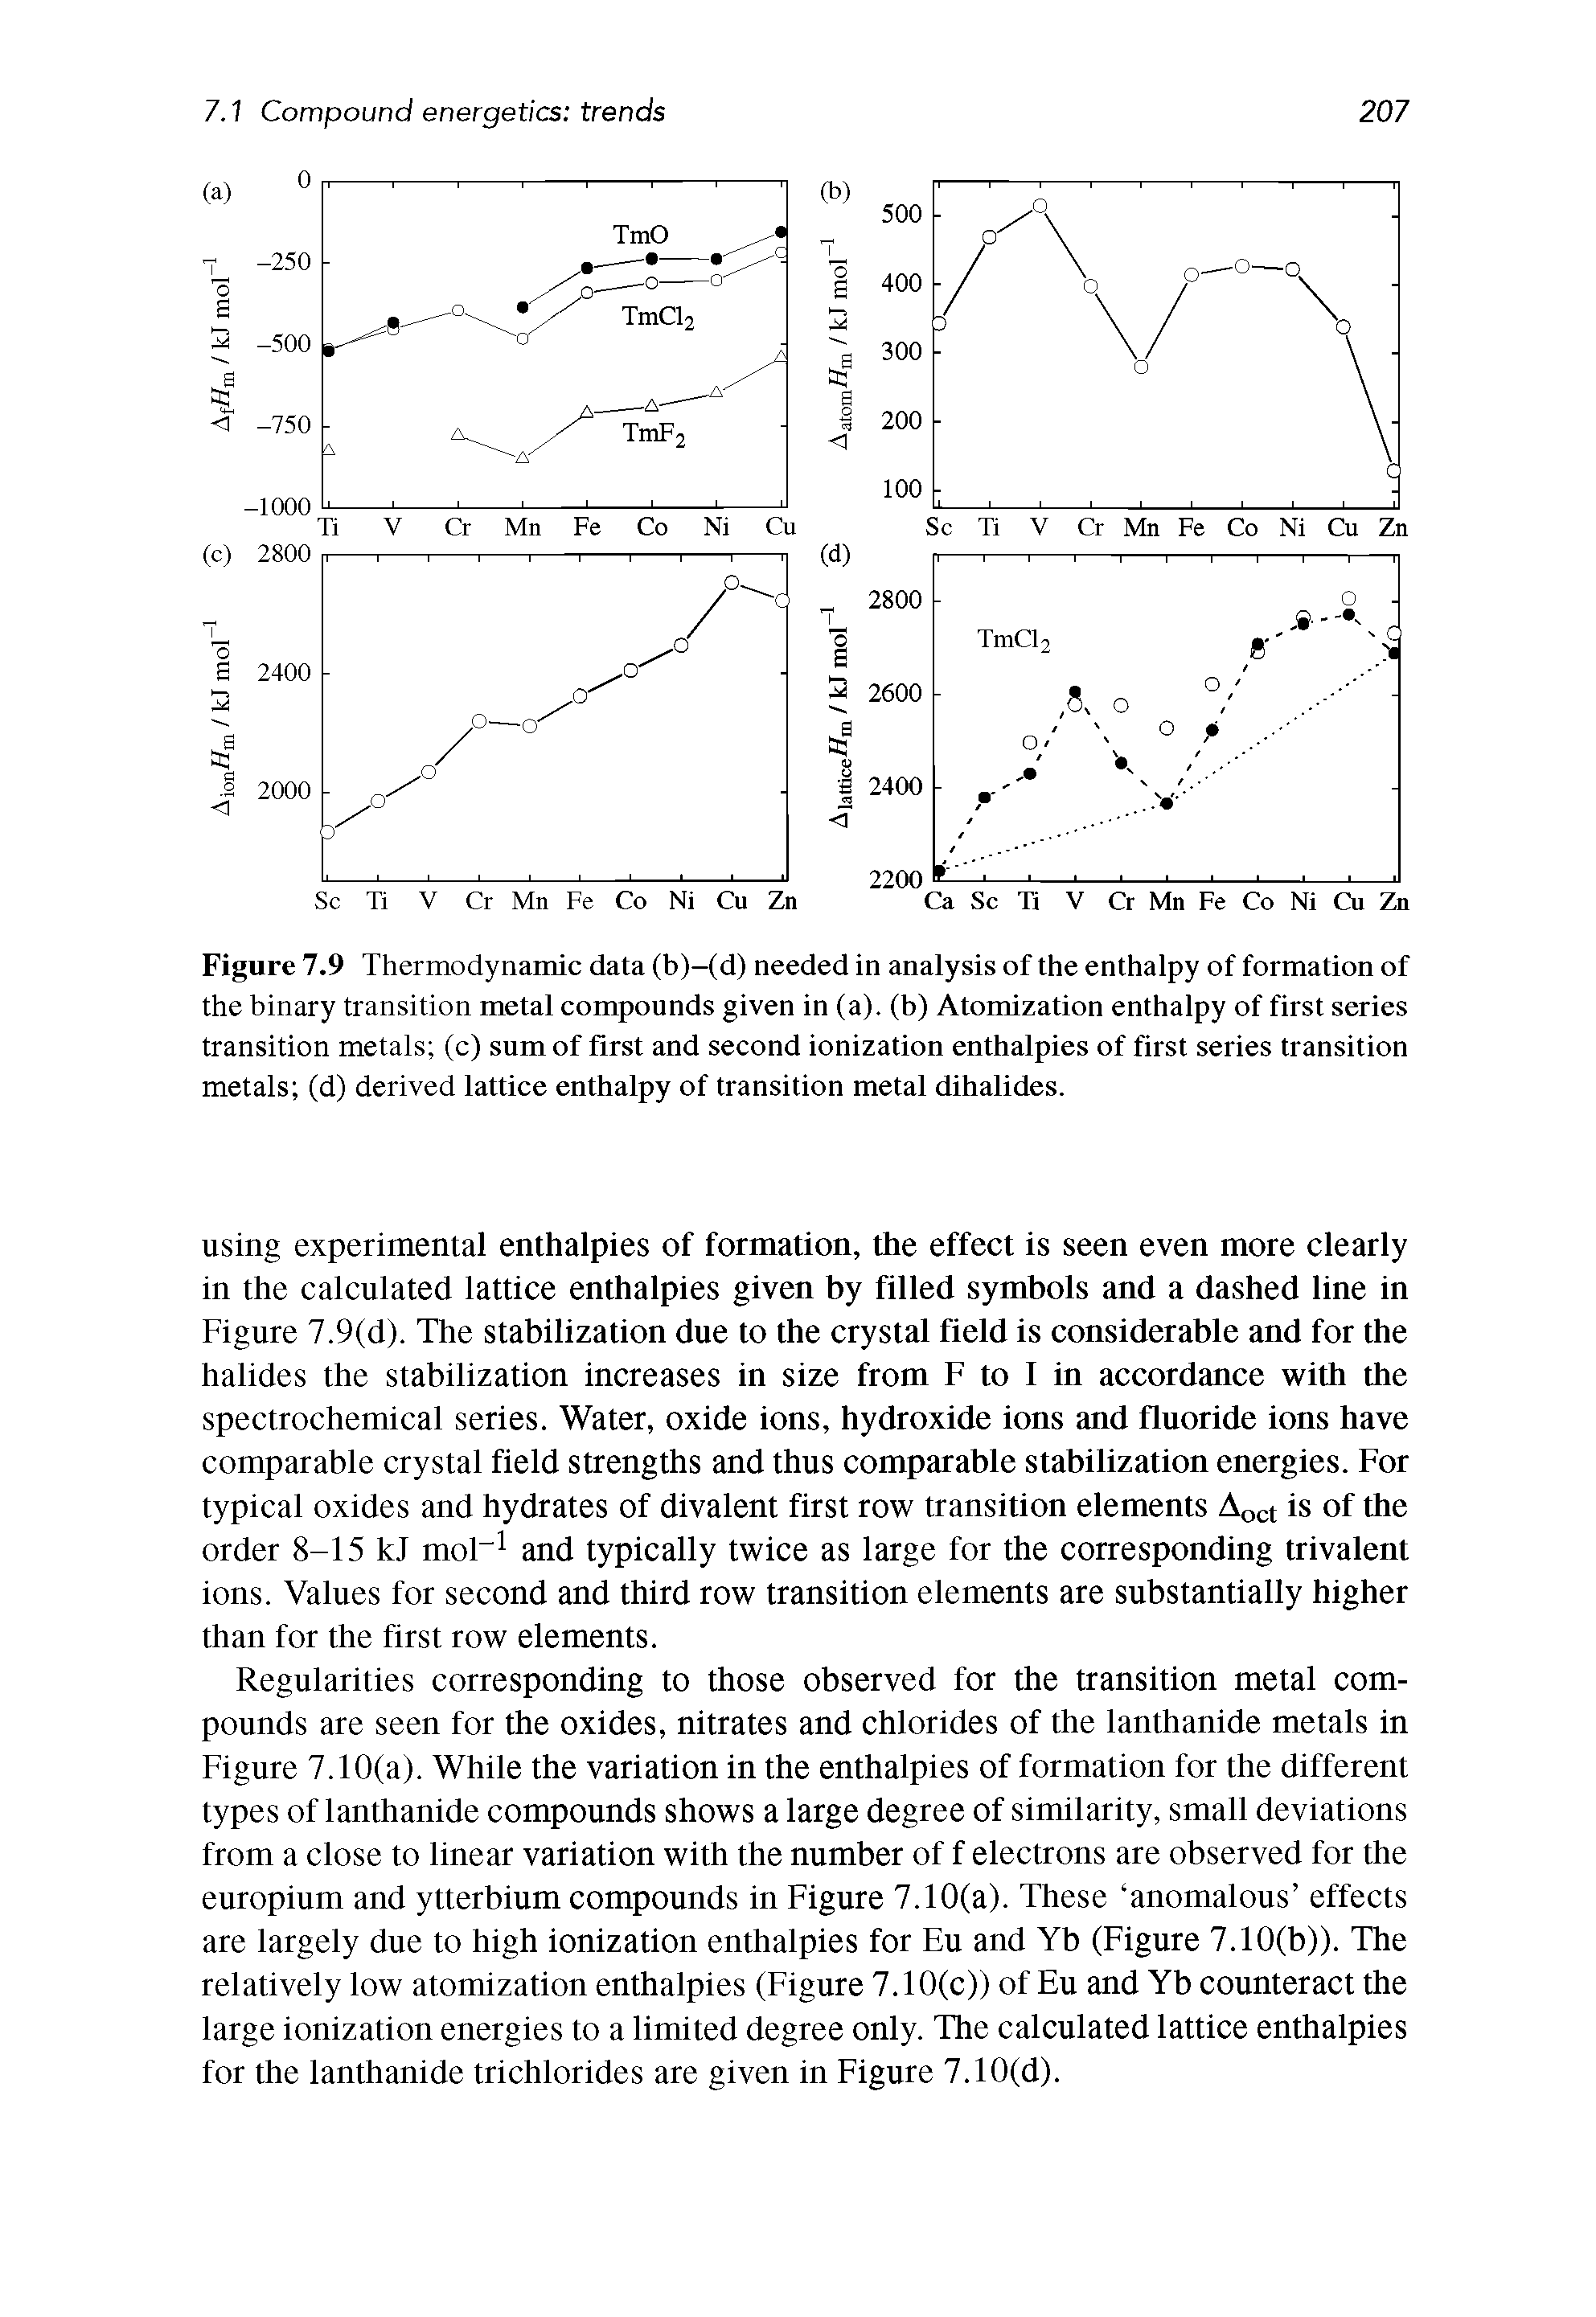 Figure 7.9 Thermodynamic data (b)-(d) needed in analysis of the enthalpy of formation of the binary transition metal compounds given in (a), (b) Atomization enthalpy of first series transition metals (c) sum of first and second ionization enthalpies of first series transition metals (d) derived lattice enthalpy of transition metal dihalides.